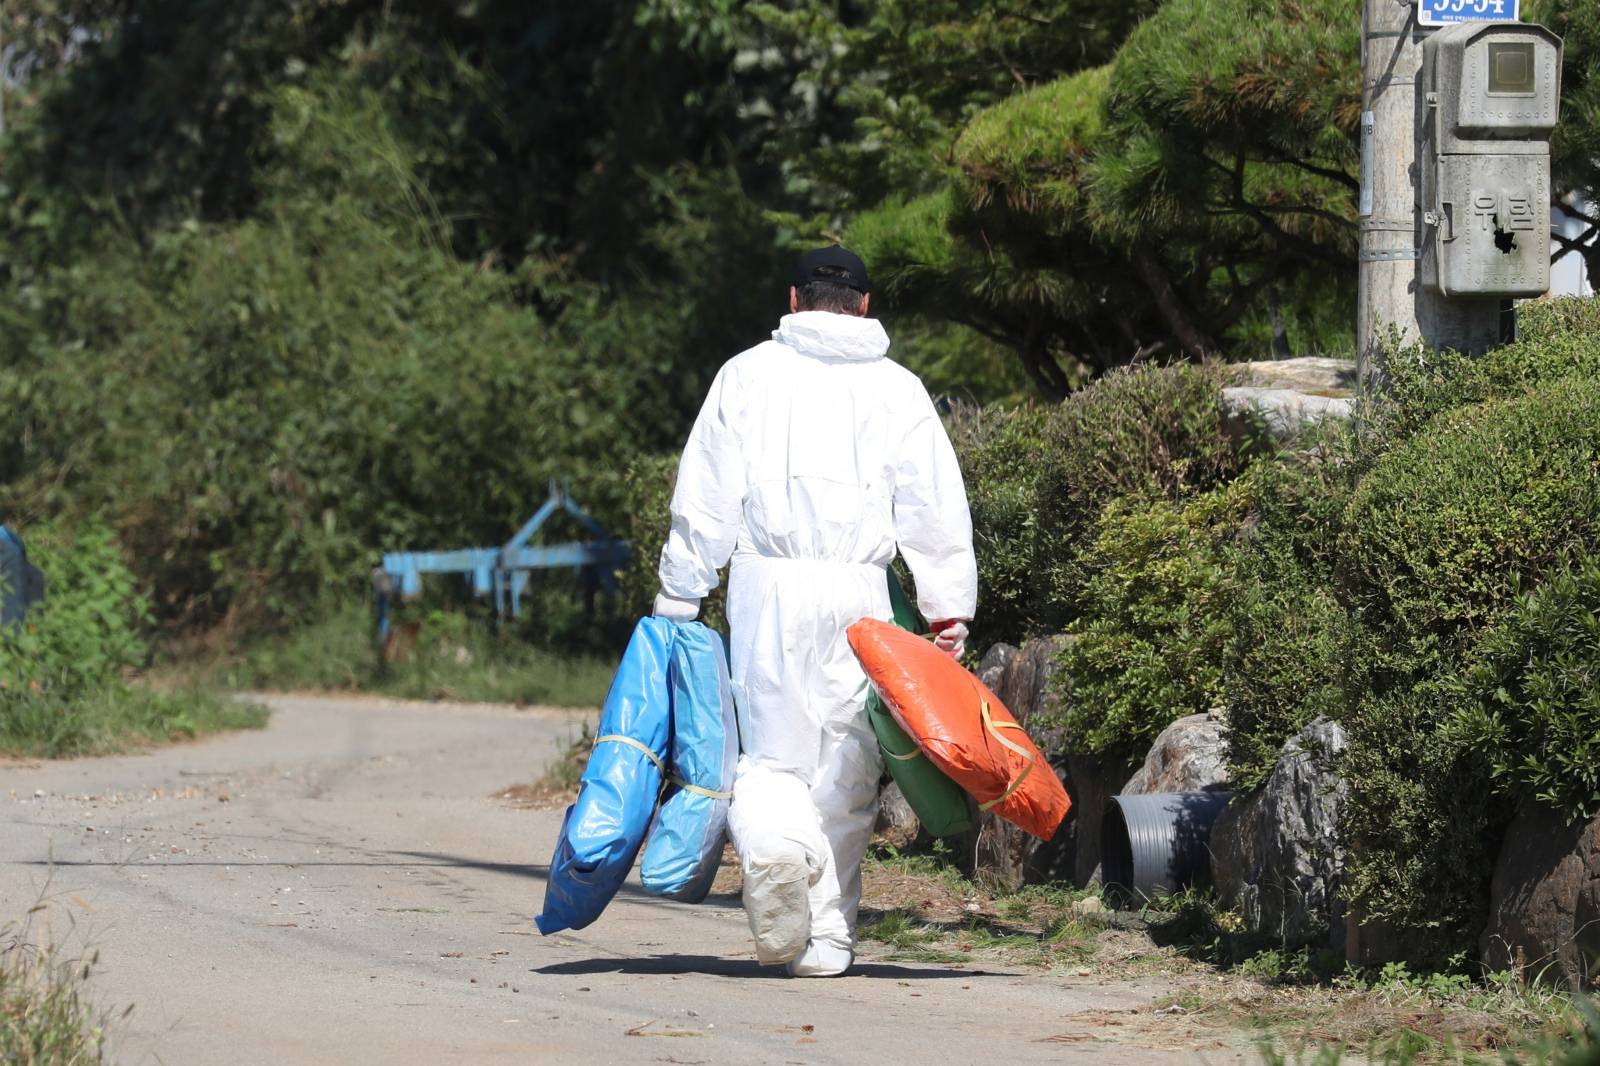 A quarantine official wearing protective gear walks near a pig farm involved in African swine fever in Yeoncheon